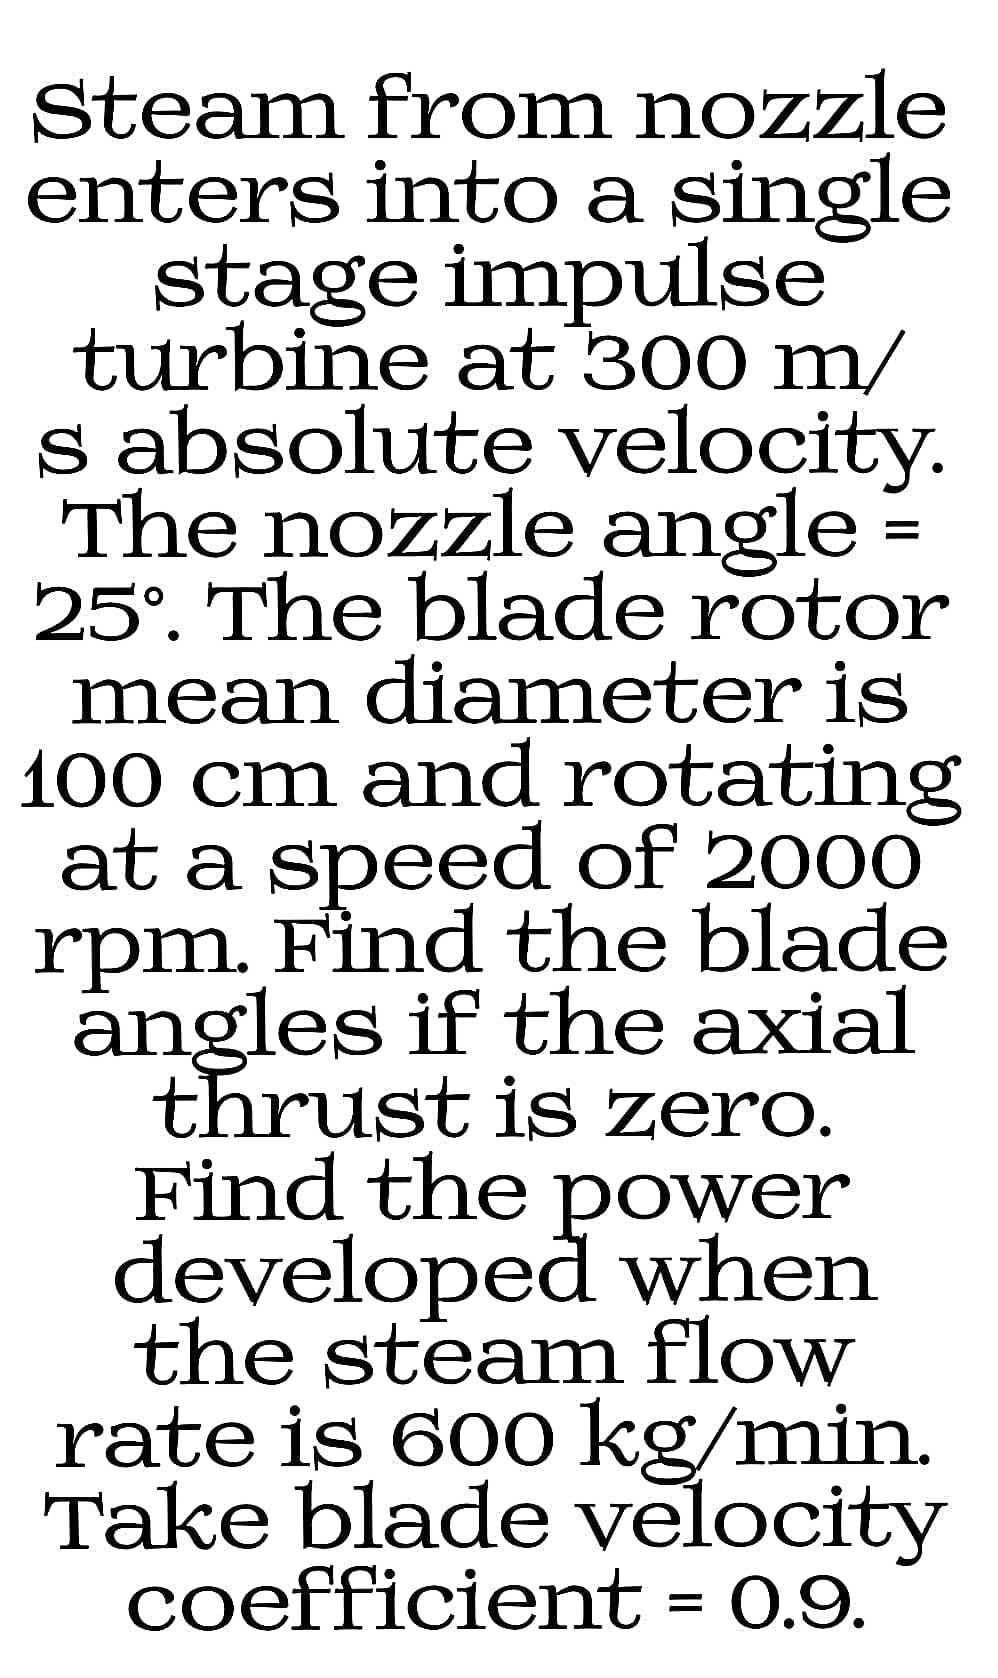 Steam from nozzle
enters into a single
stage impulse
turbine at 300 m/
s absolute velocity.
The nozzle angle =
25°. The blade rotor
mean diameter is
100 cm and rotating
at a speed of 2000
rpm. Find the blade
angles if the axial
thrust is zero.
Find the power
developed when
the steam flow
rate is 60o kg/min.
Take blade velocity
coefficient = 0.9.
